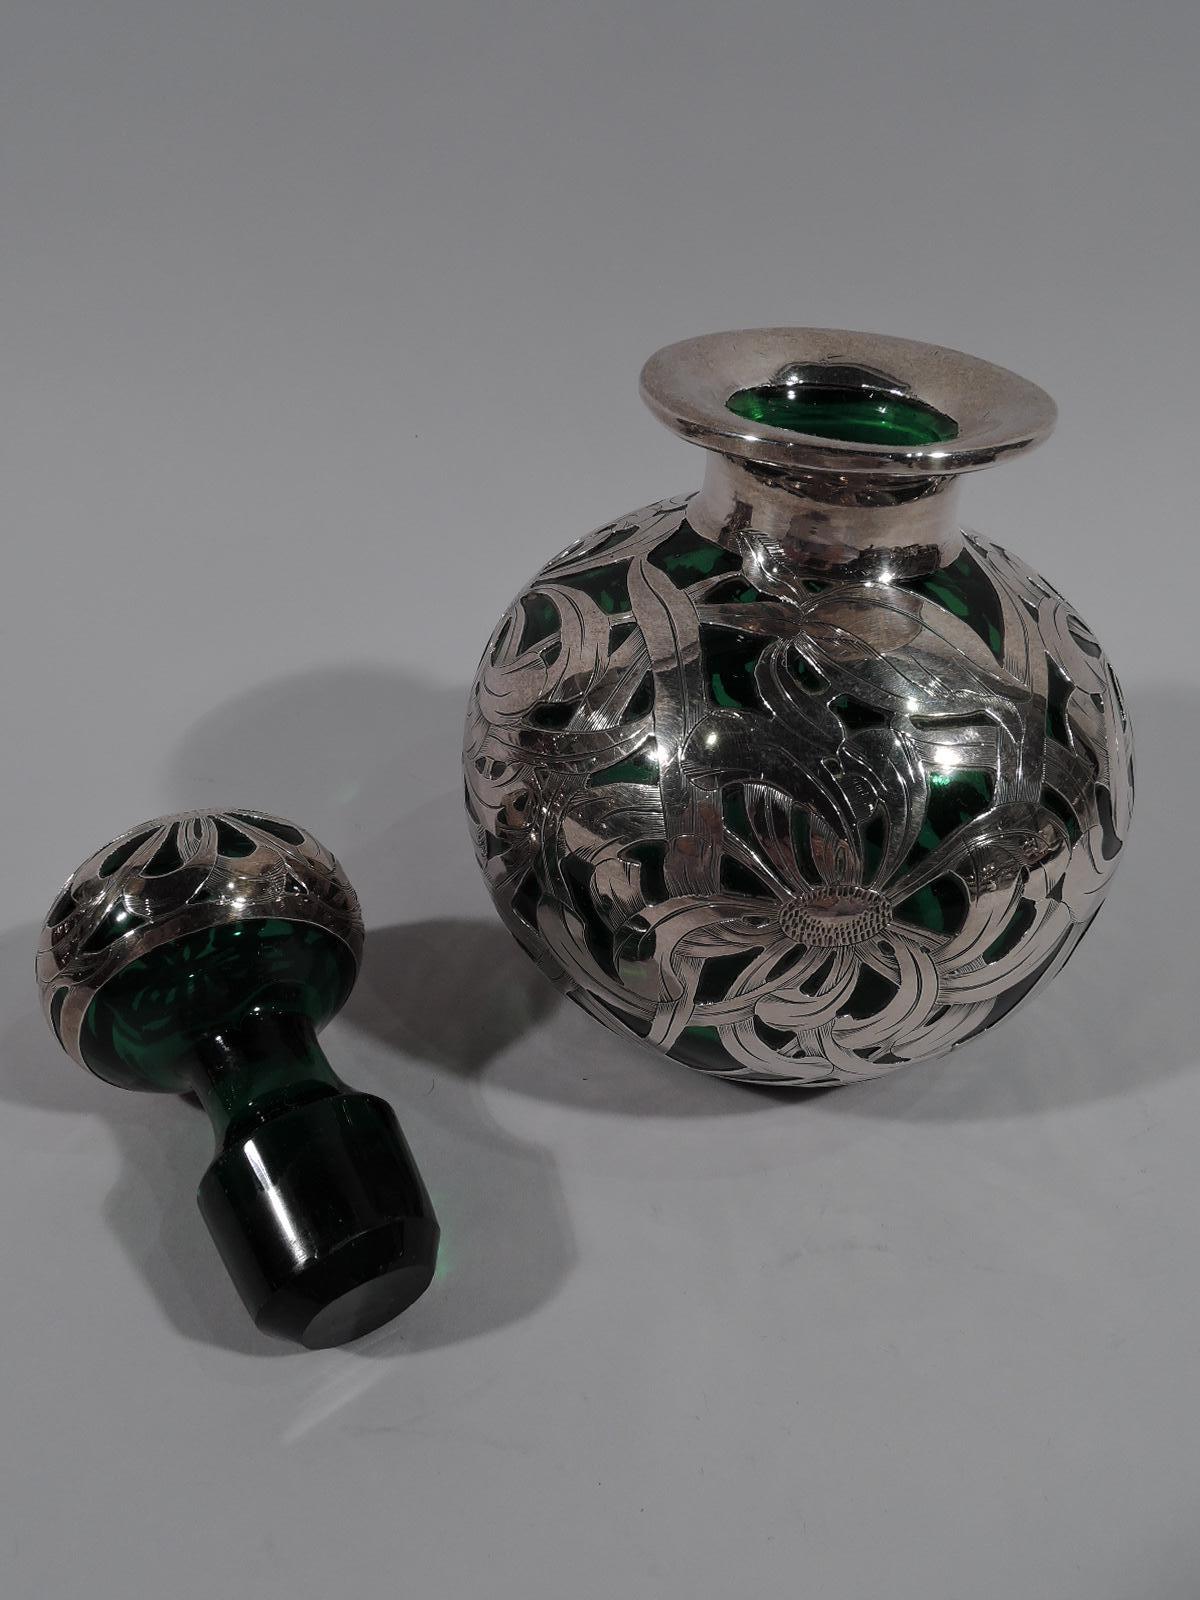 Large American Art Nouveau green glass perfume bottle with engraved silver overlay. Globular with short neck and everted rim in collar. Ball stopper. Overlay in dense and dynamic flower head pattern with interlaced and overlapping petals and